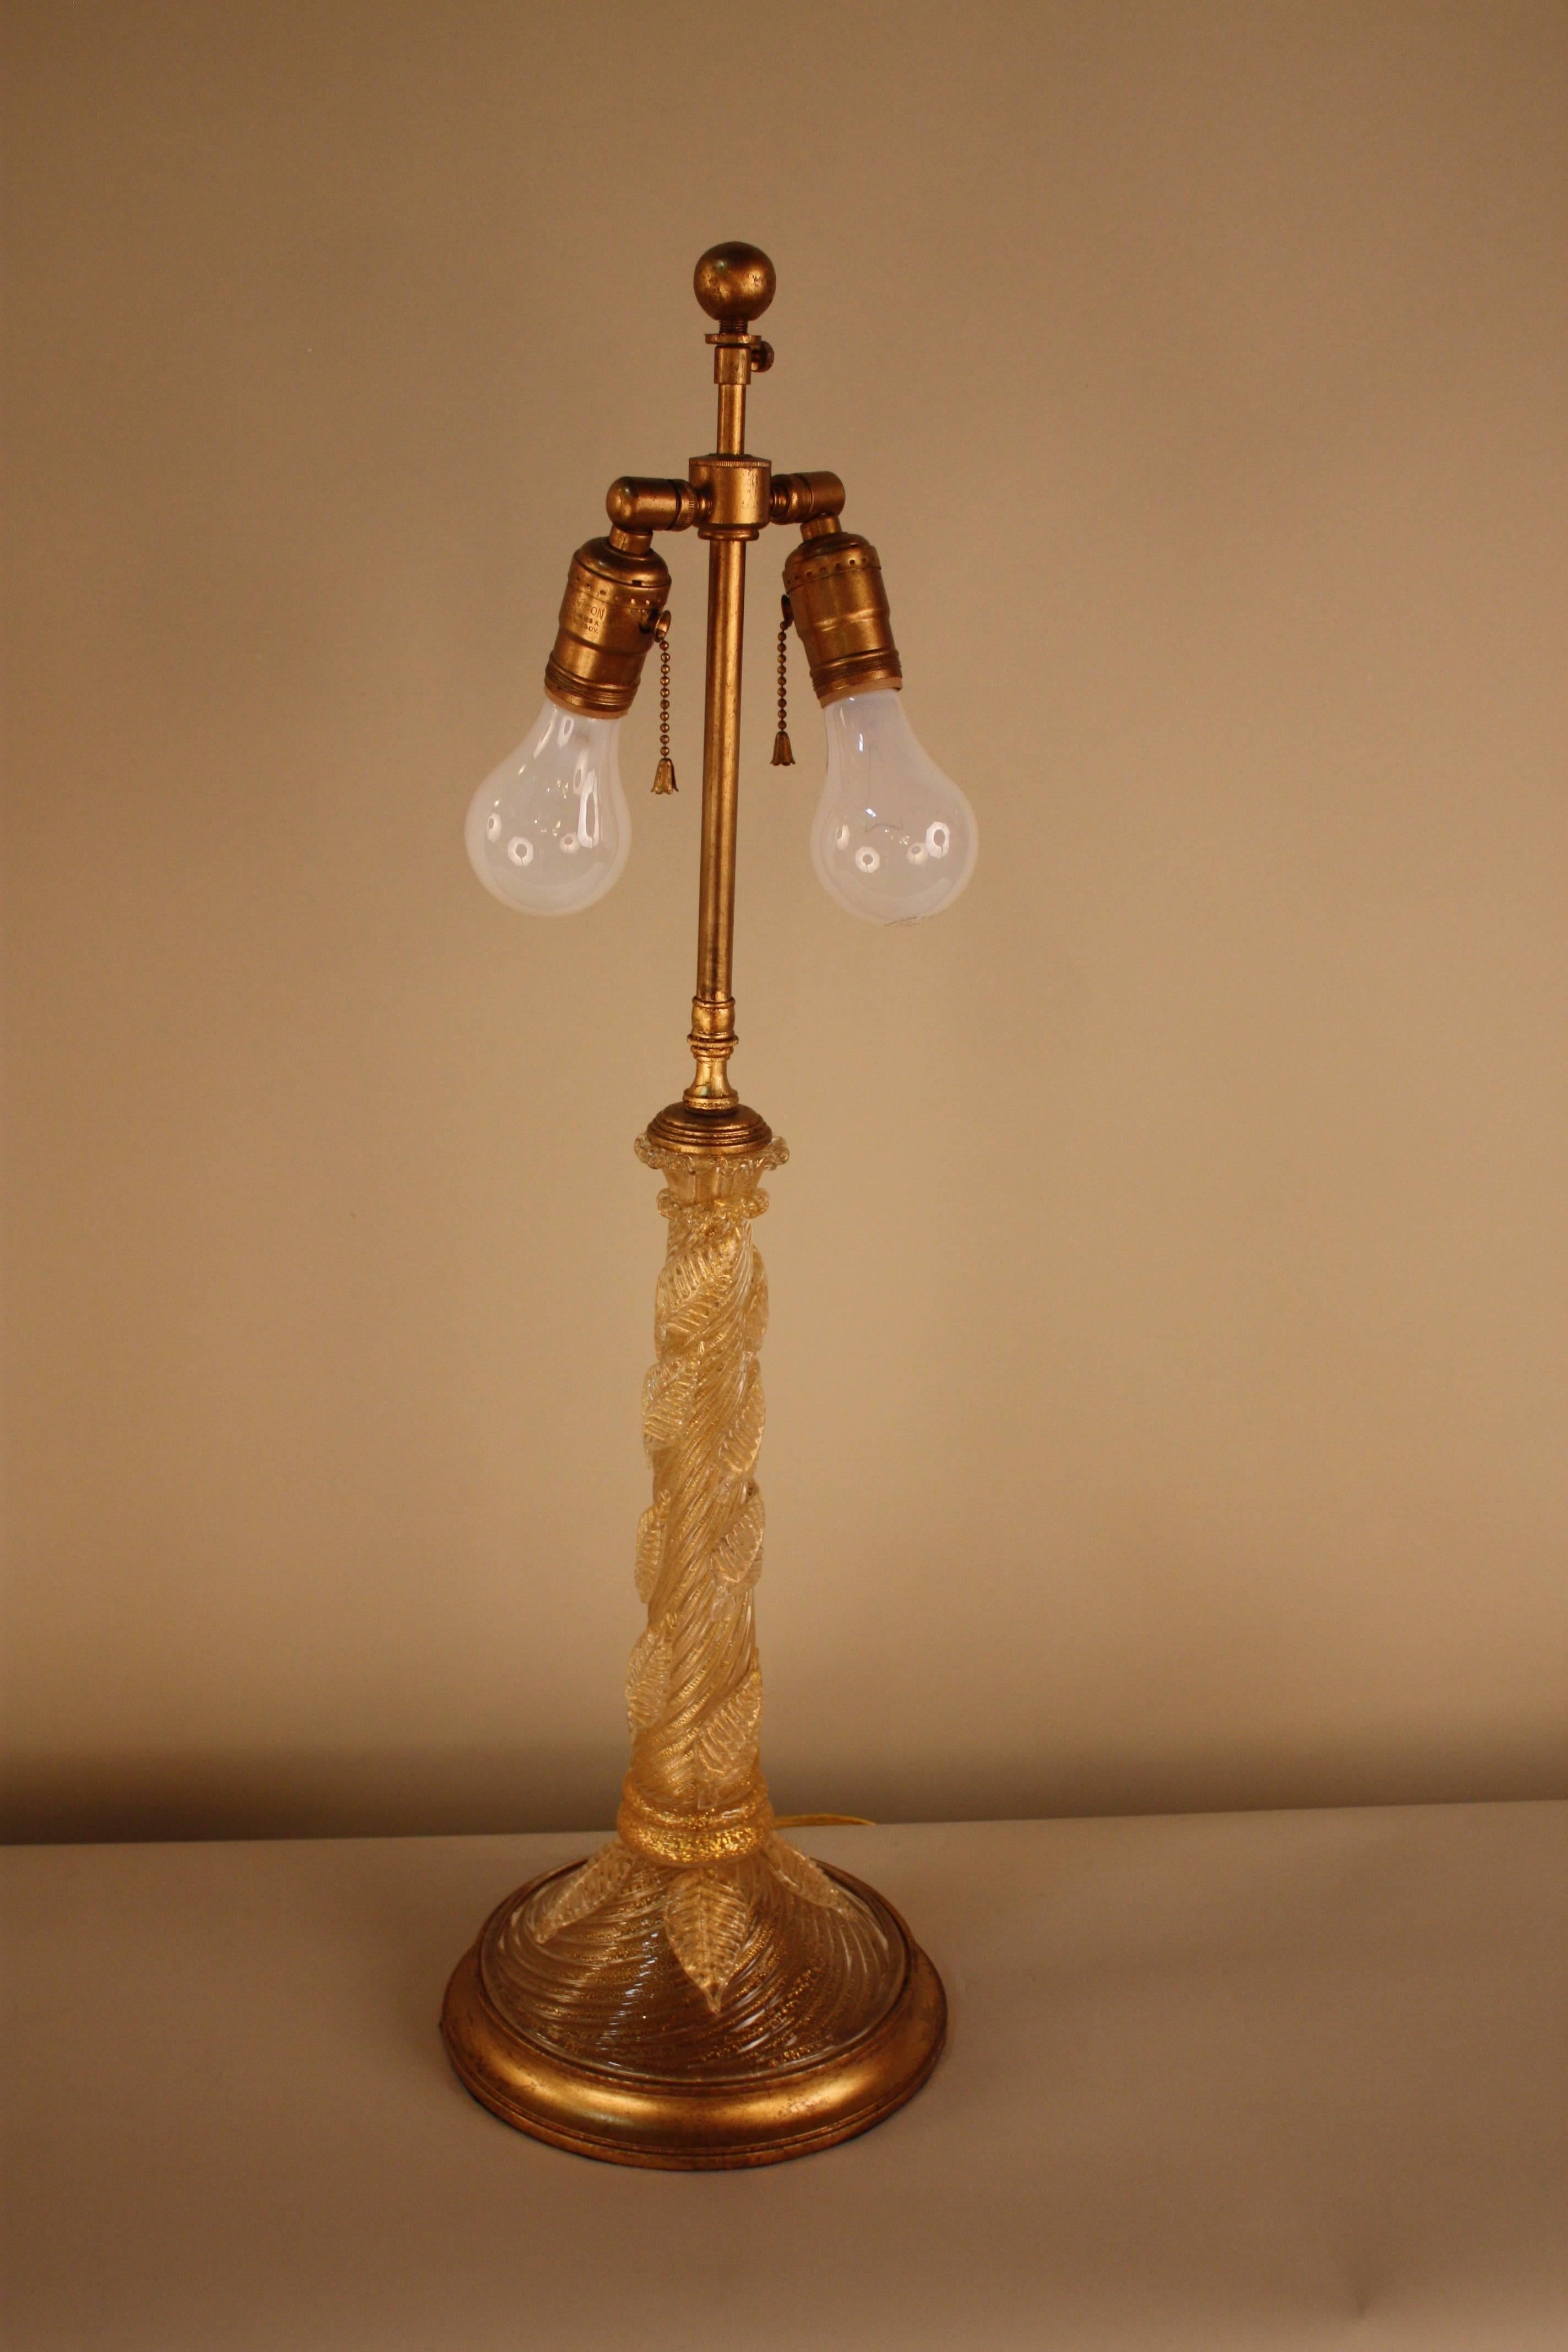 Golden Murano hand blow glass twist column table lamps with gold leaf wooden base.